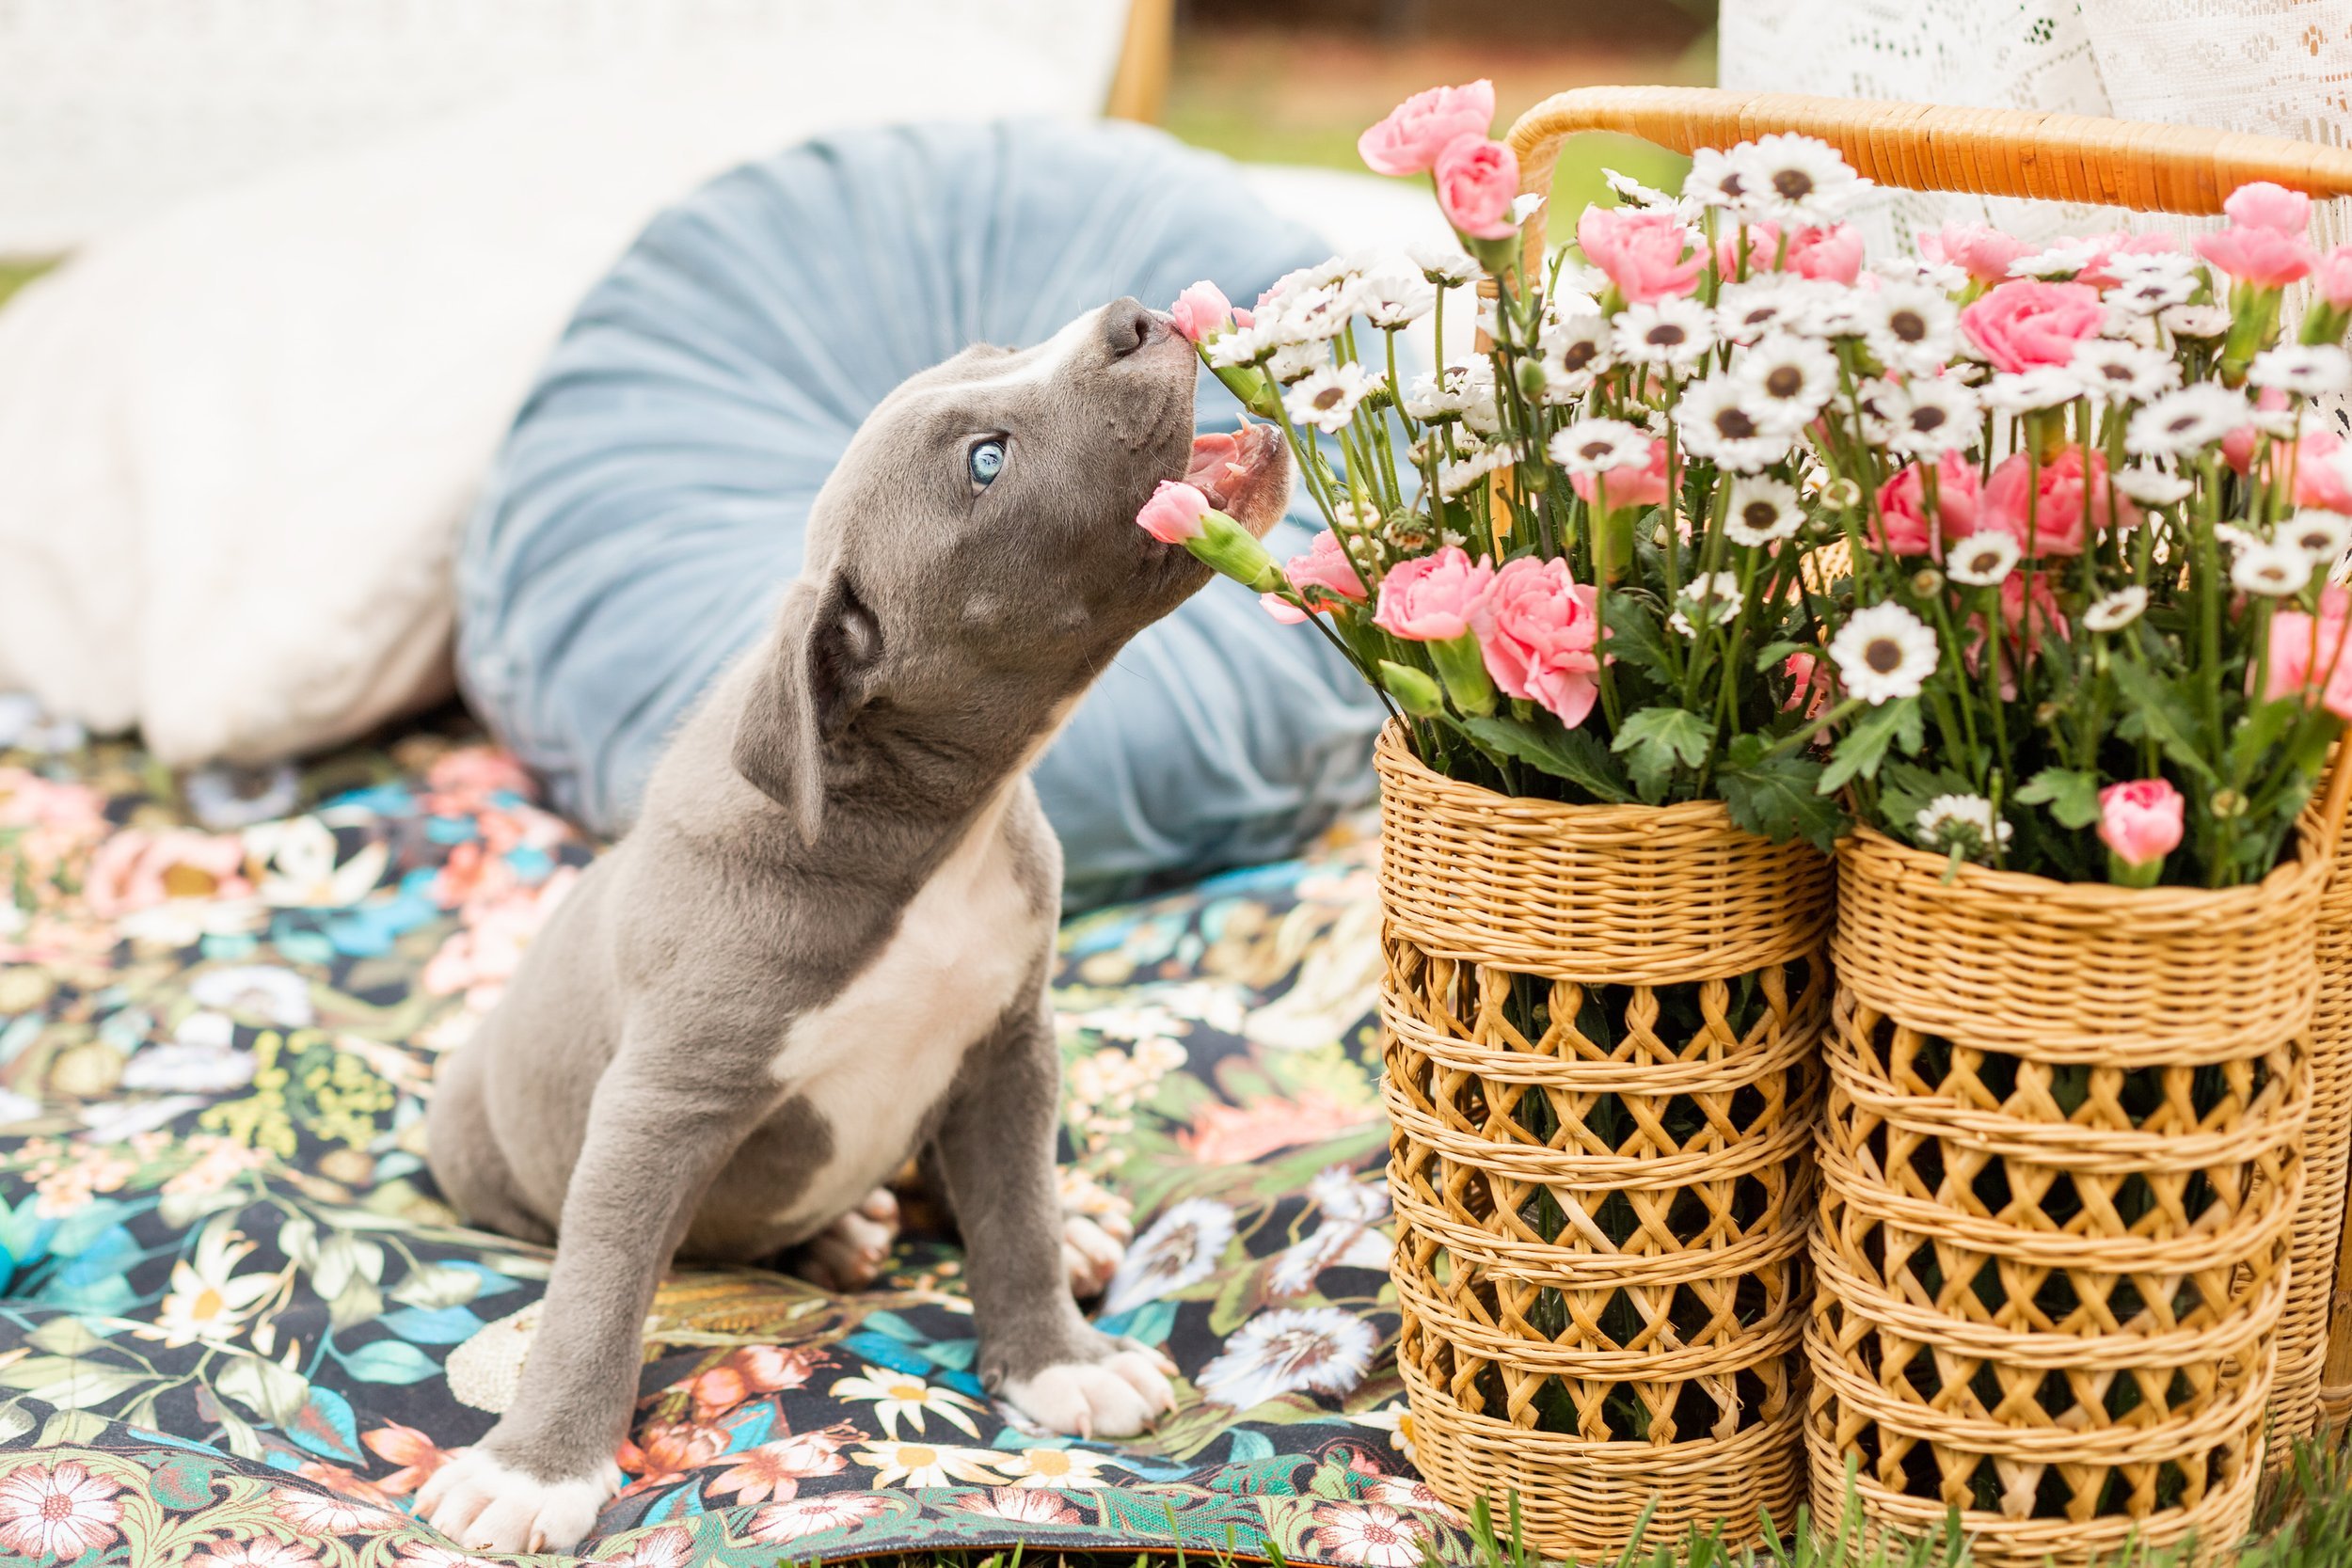 www.santabarbarawedding.com | Veils &amp; Tails Photography | Grey Pitbull Puppy Trying to Chew on Pink Flowers in a Basket